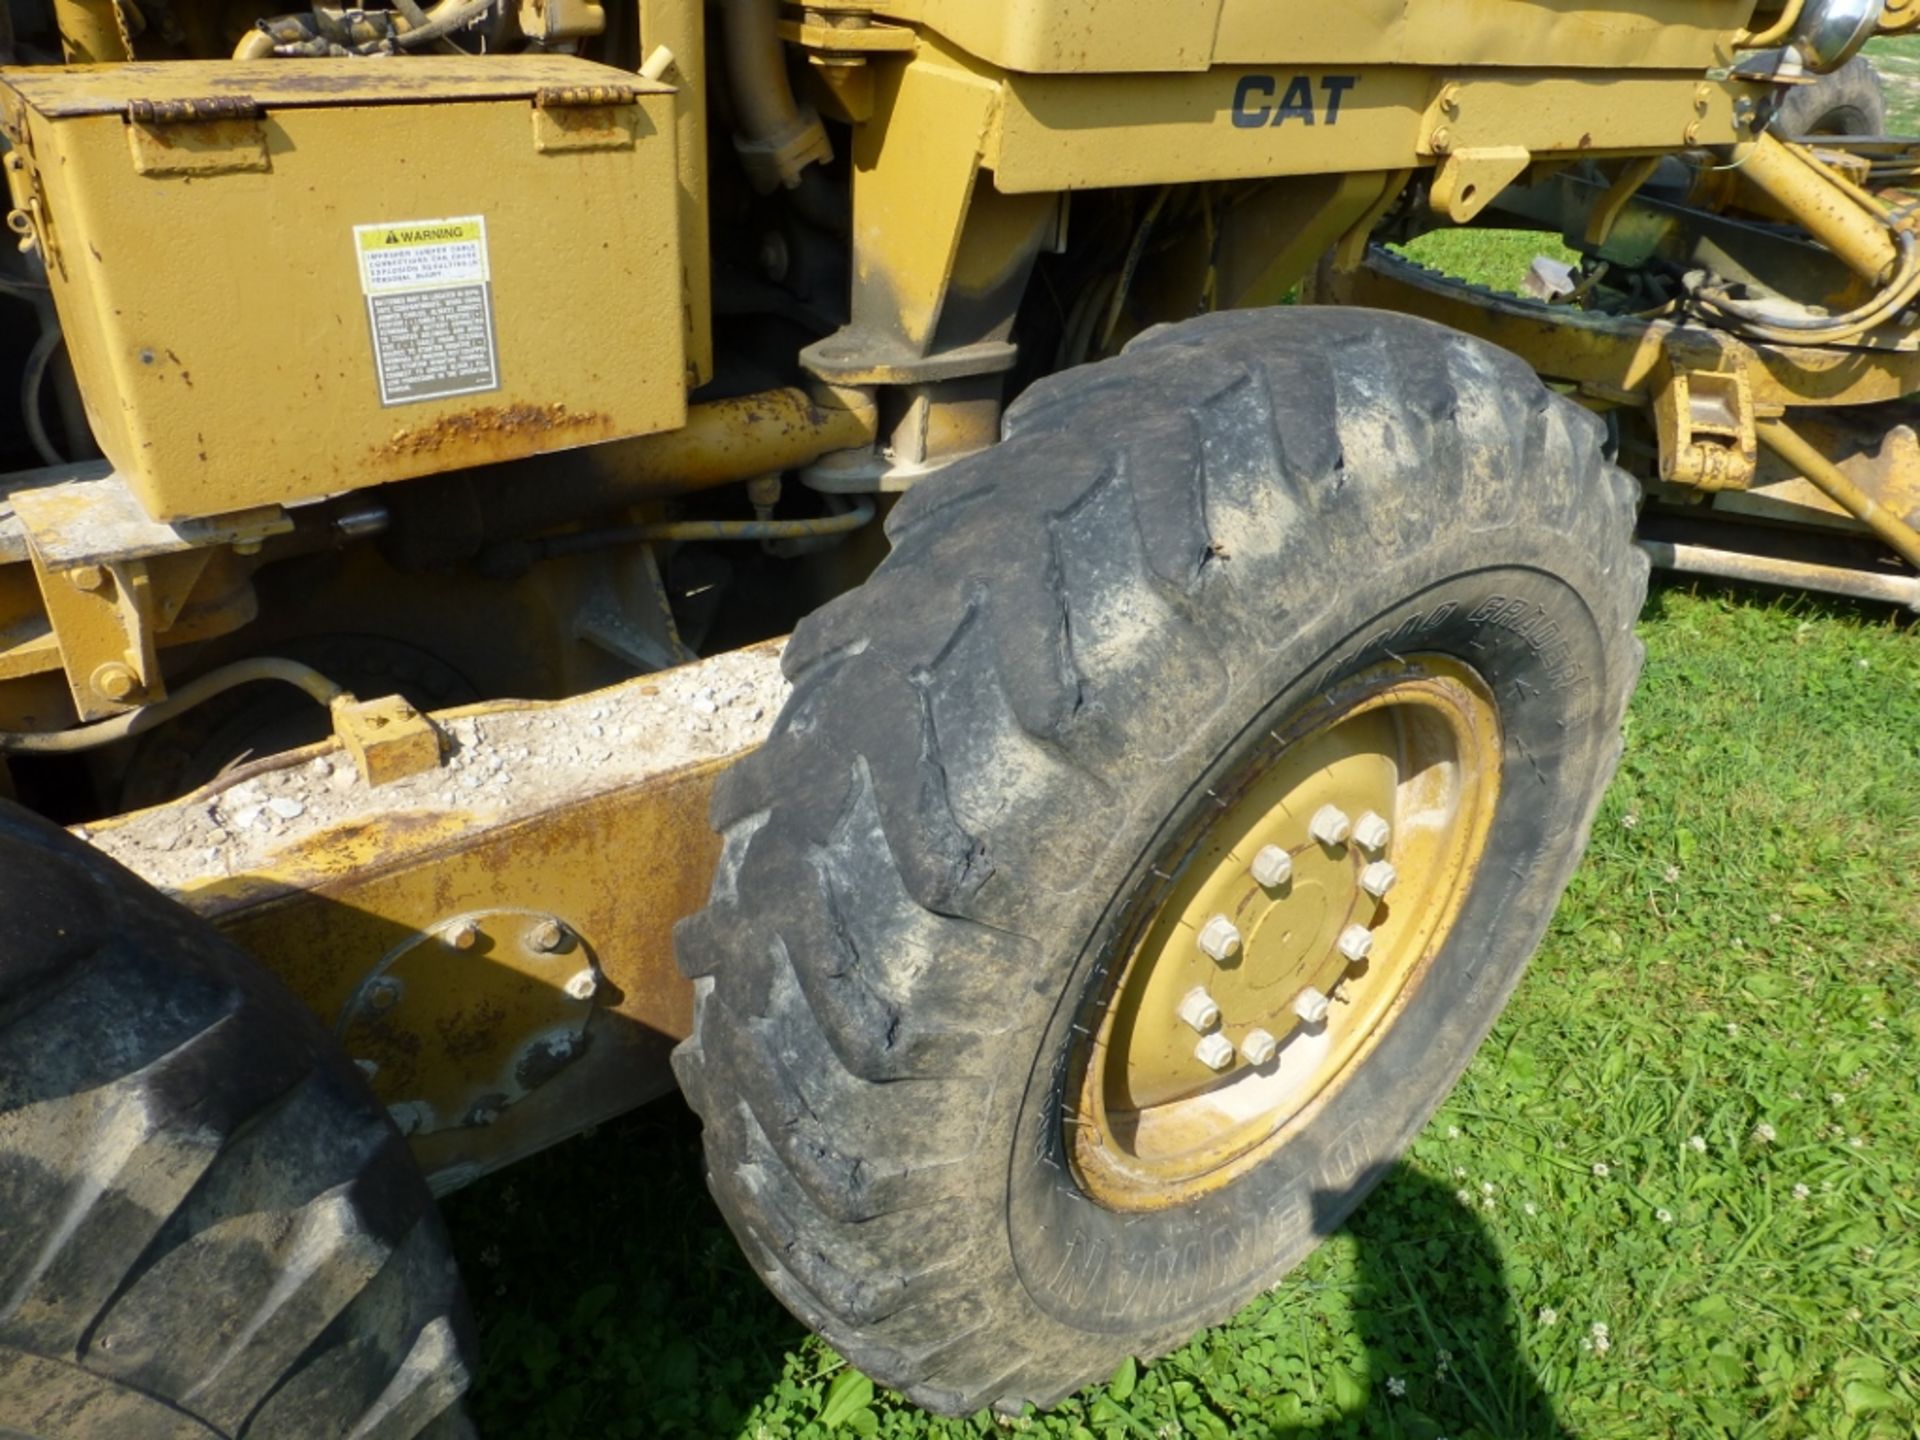 Caterpillar 120G motor grader with 13'10" moldboard se:87v871. Power shift. 7720 unverified hrs. - Image 24 of 27